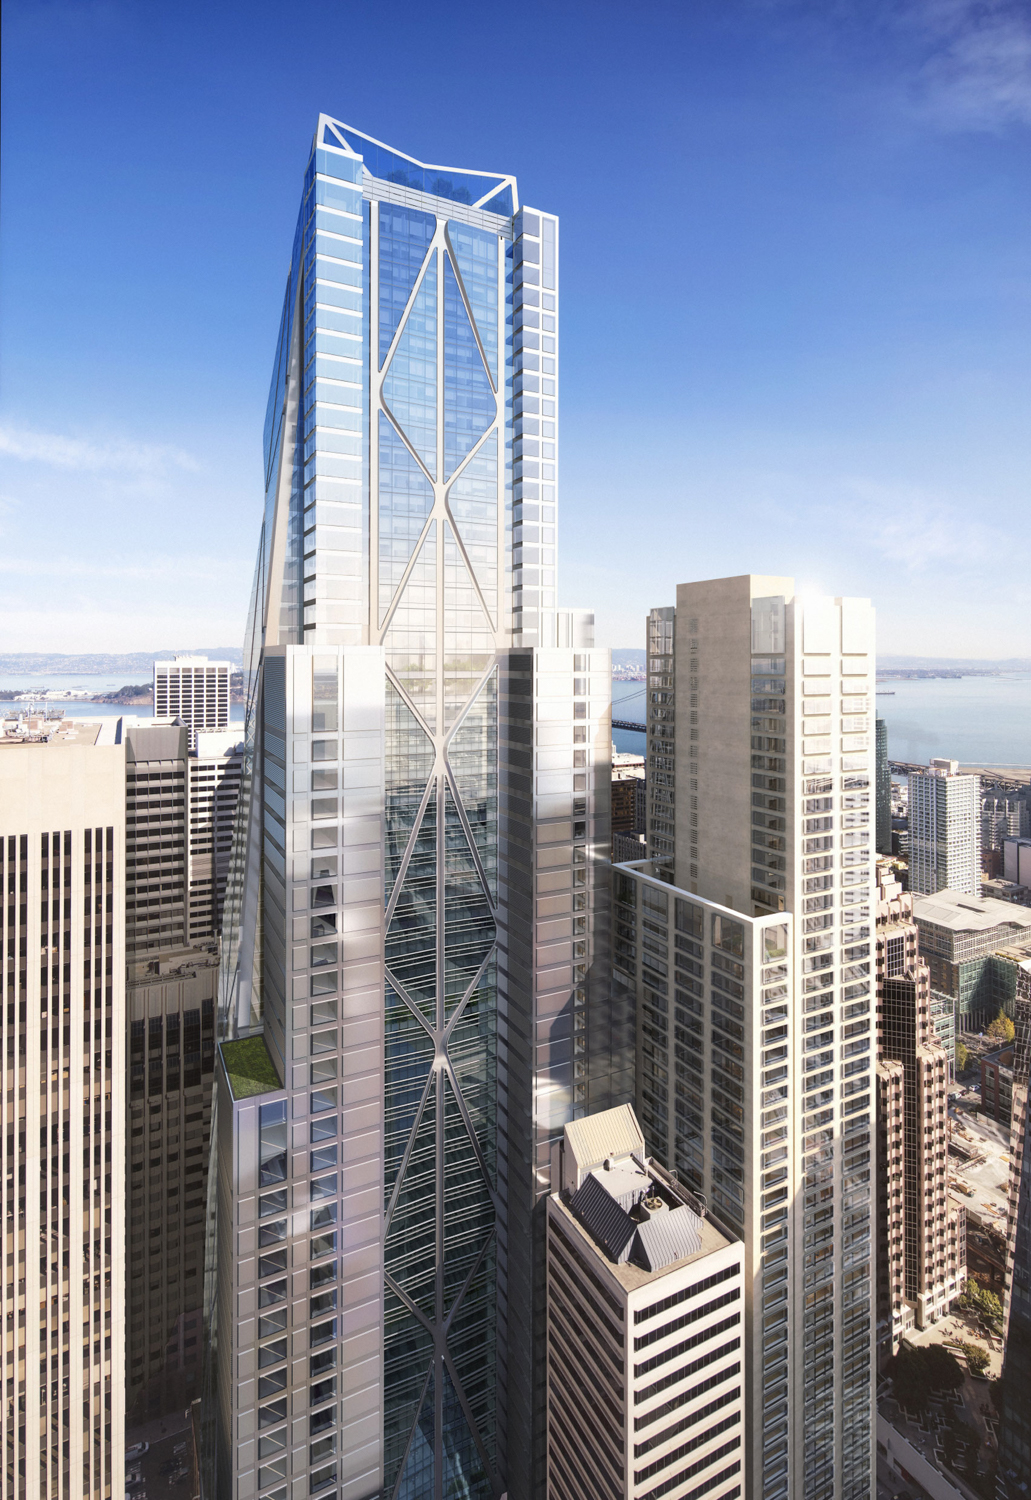 Oceanwide Center western elevation, rendering of design by Foster and Partners